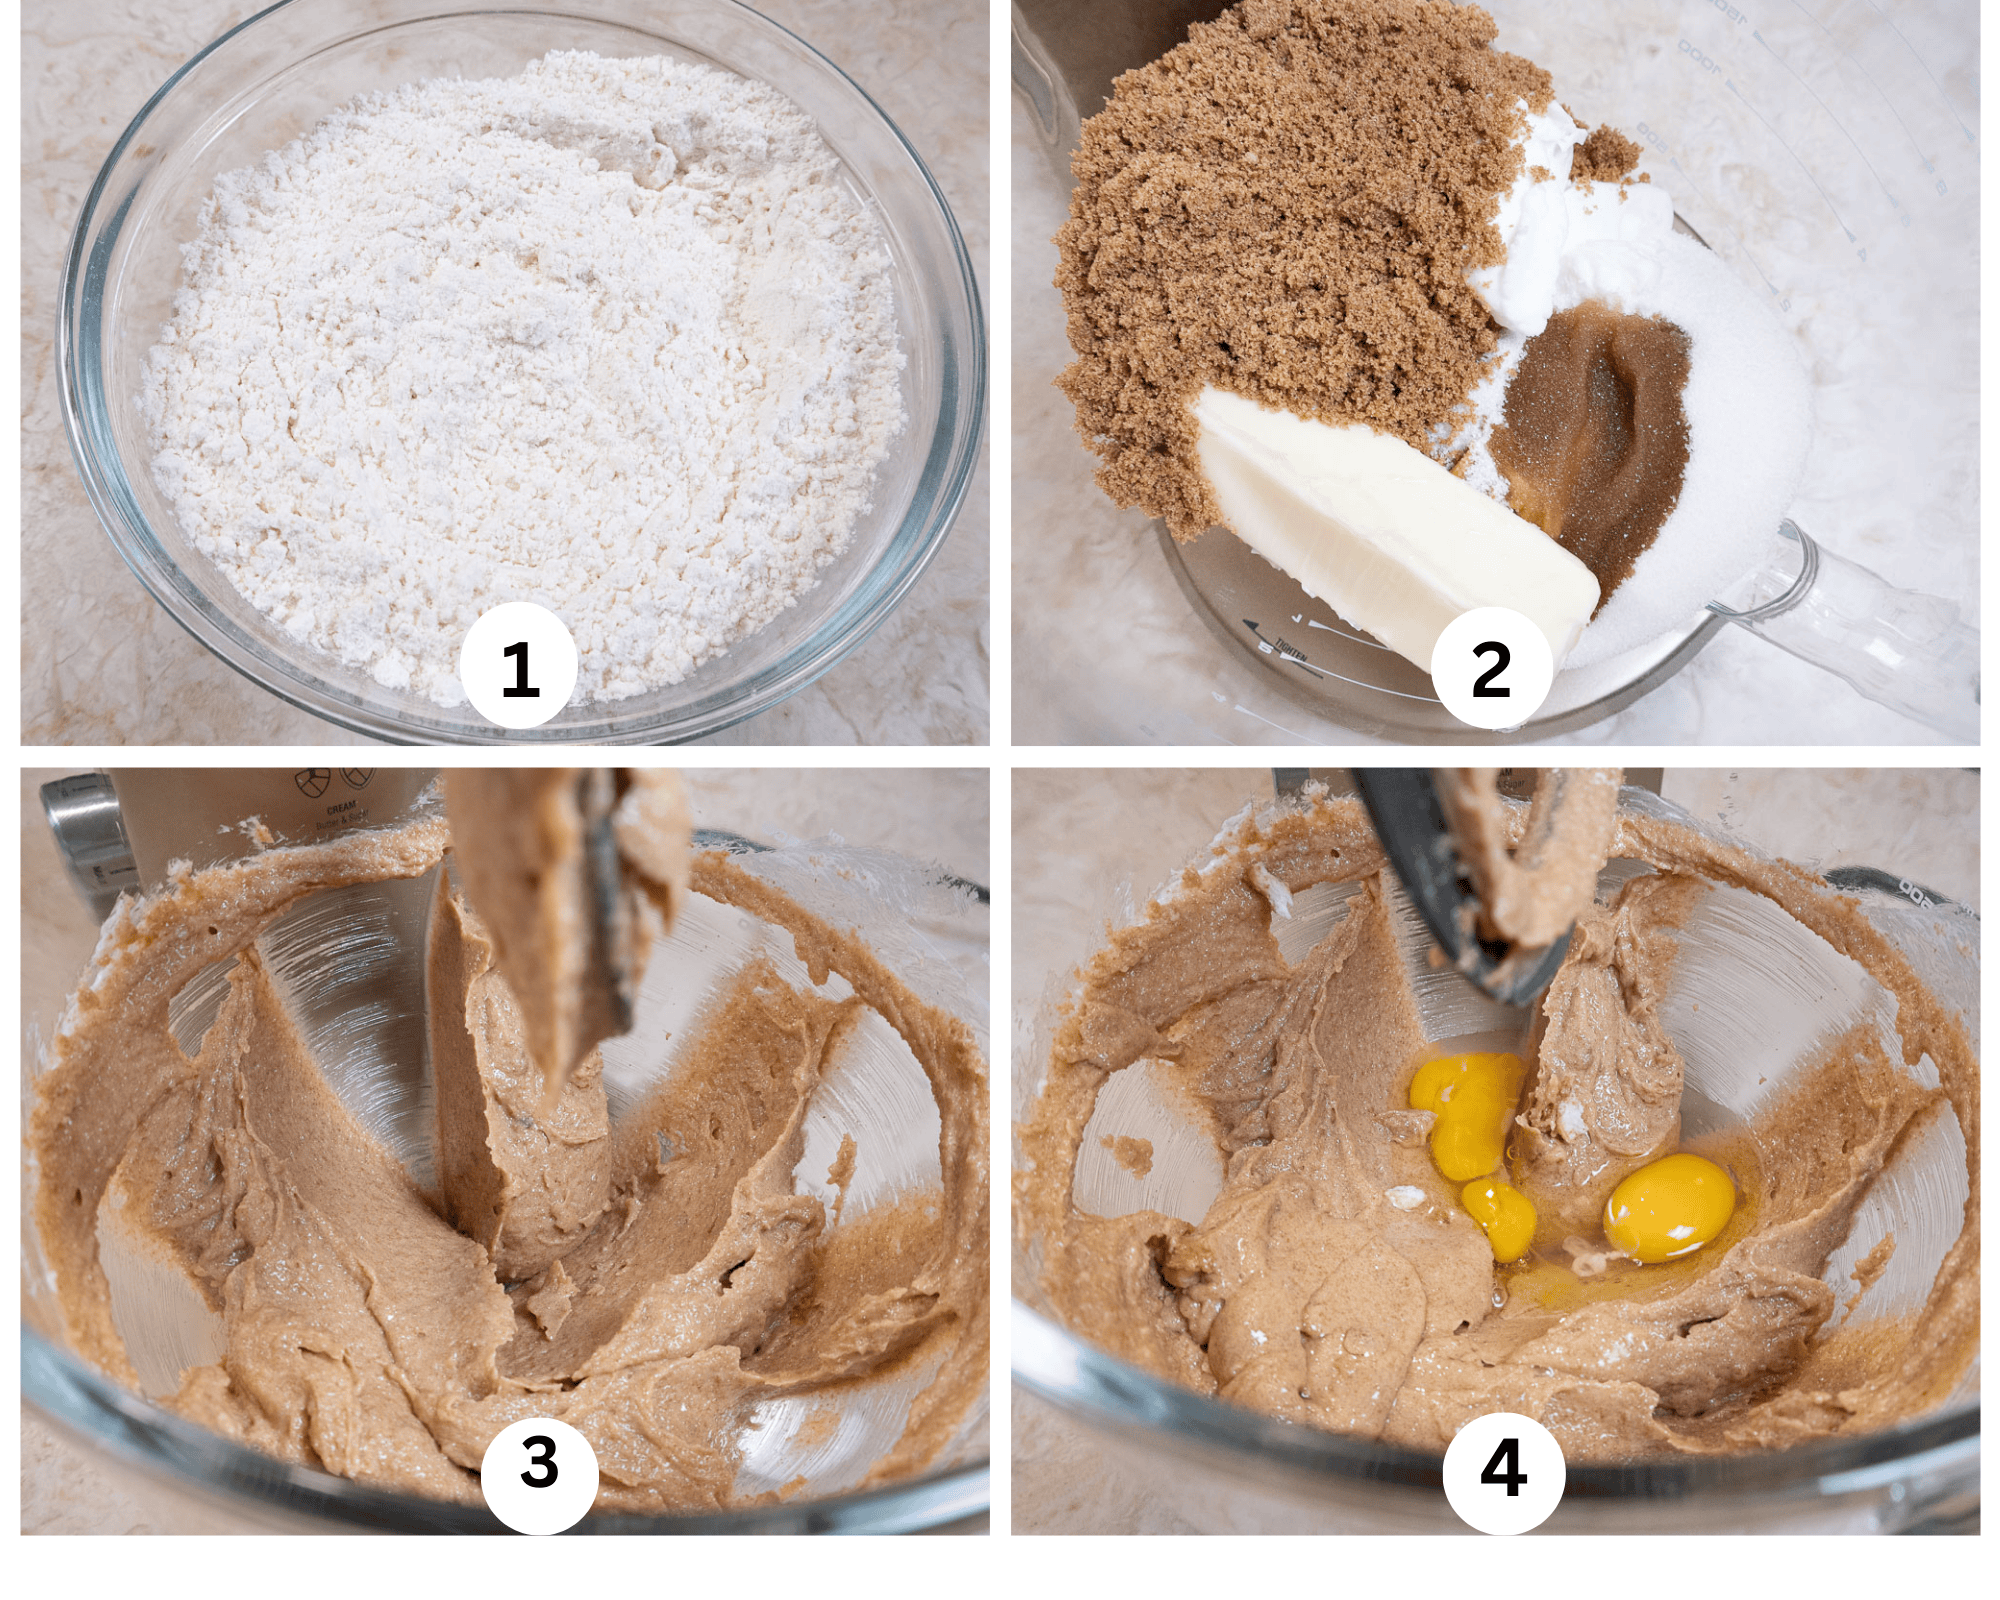 The first collages shows a bowl holds the dry ingredients, the sugar, butter, shorting and vanilla in the bowl of a mixer.